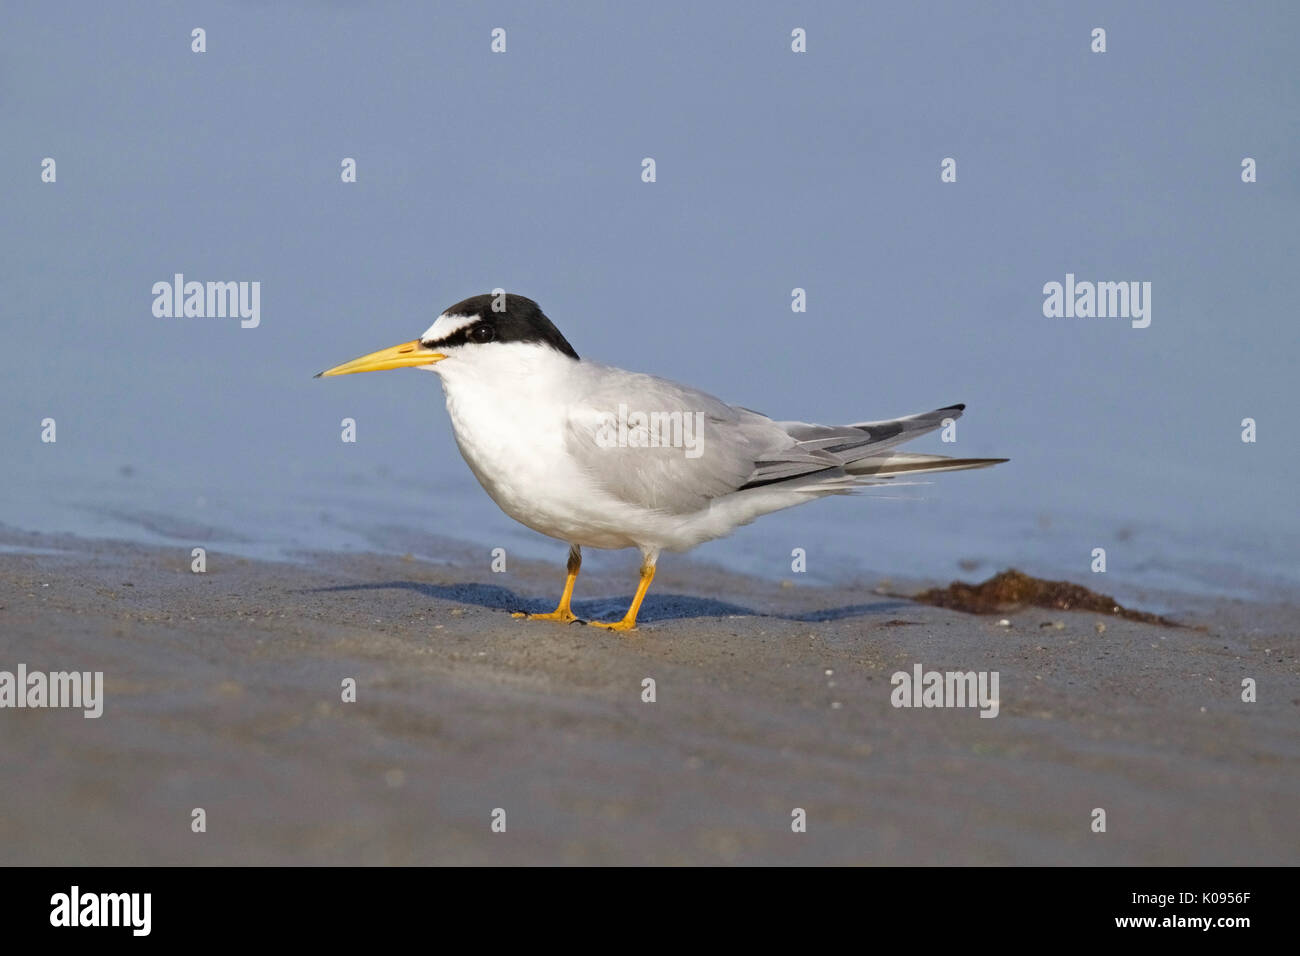 An endangered least tern Sternula antillarum standing on the shore Stock Photo